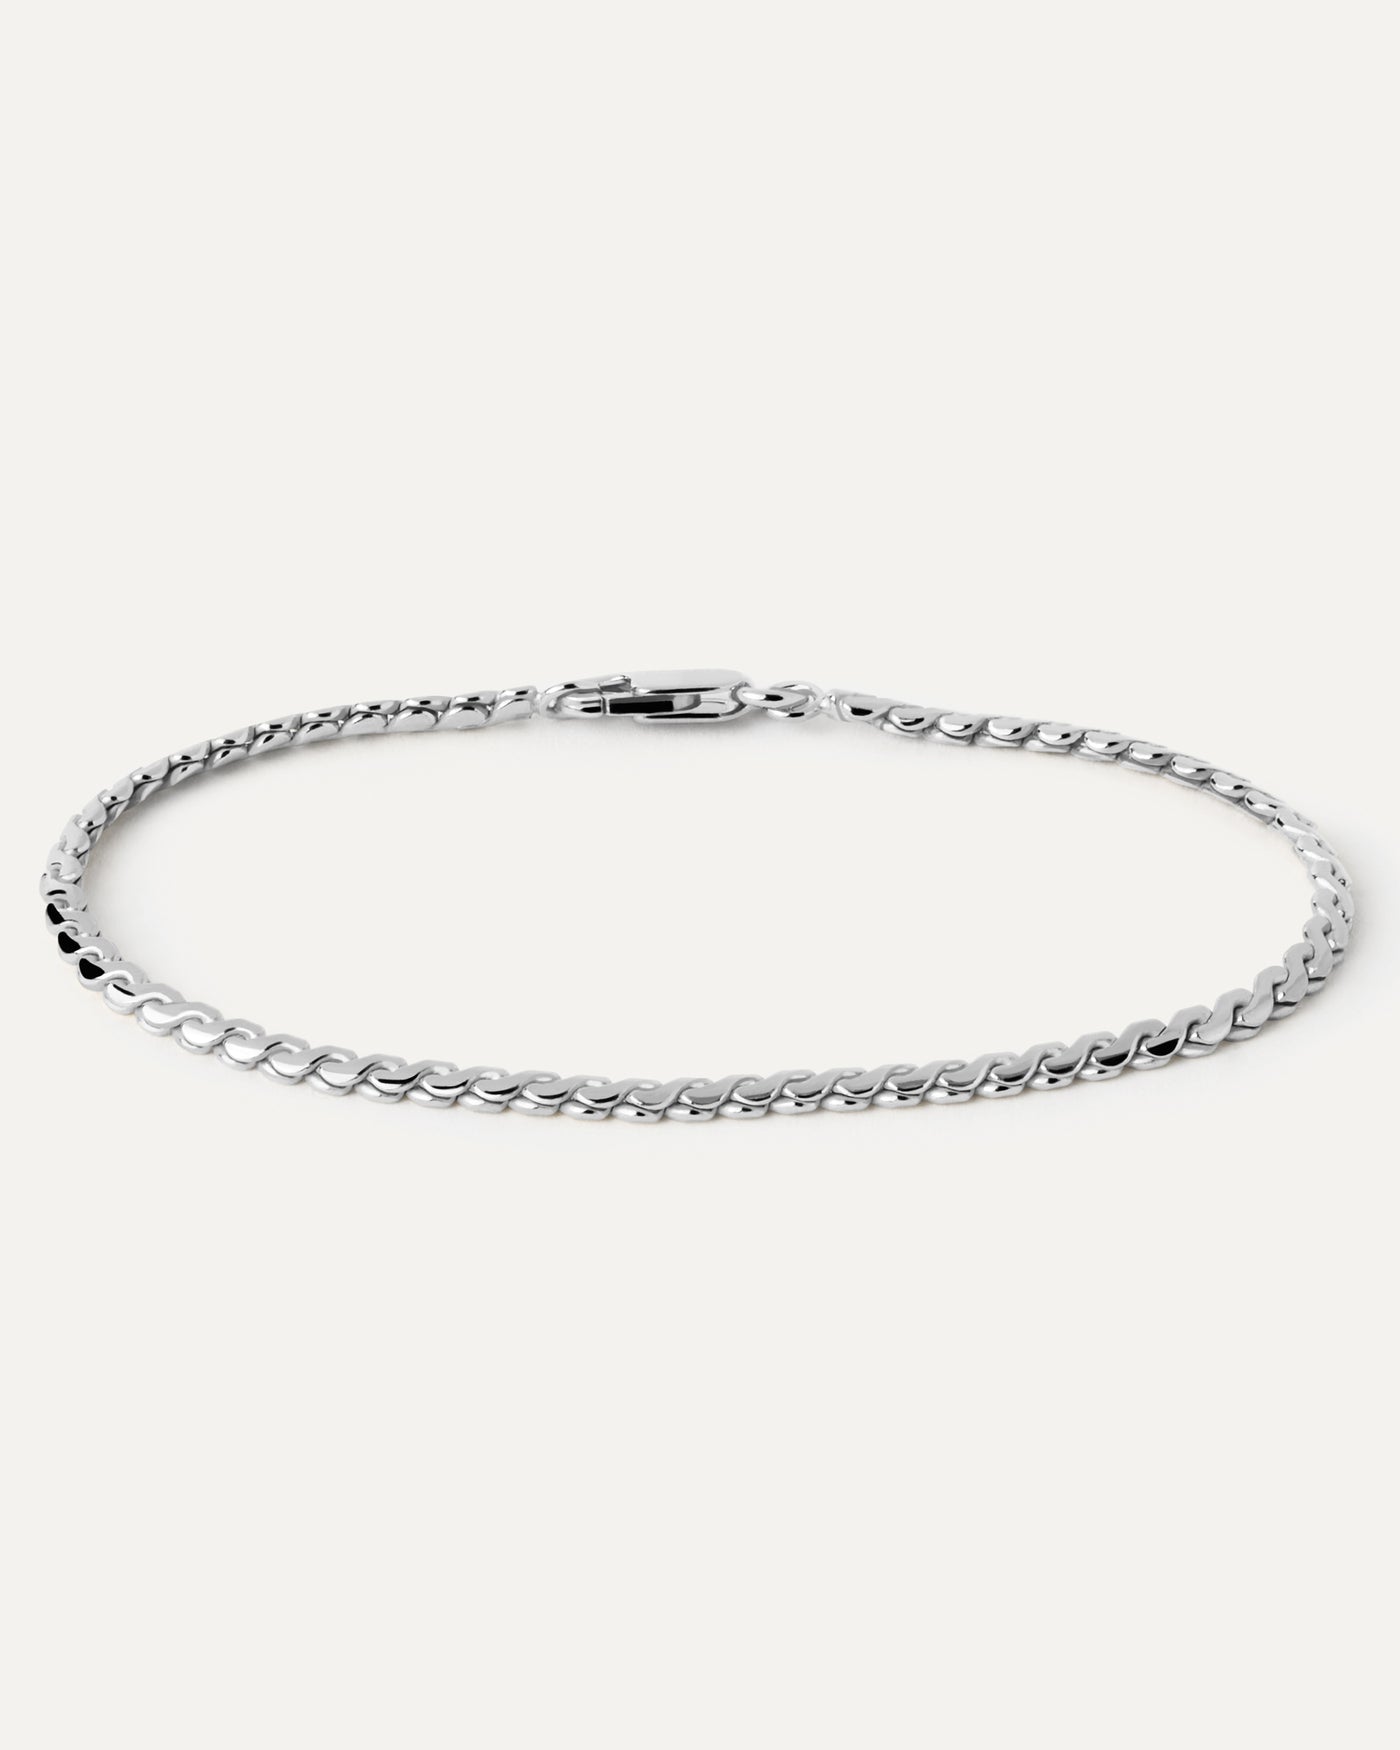 2023 Selection | Serpentine Silver Chain Bracelet. Modern serpentine silver chain bracelet with braided links. Get the latest arrival from PDPAOLA. Place your order safely and get this Best Seller. Free Shipping.